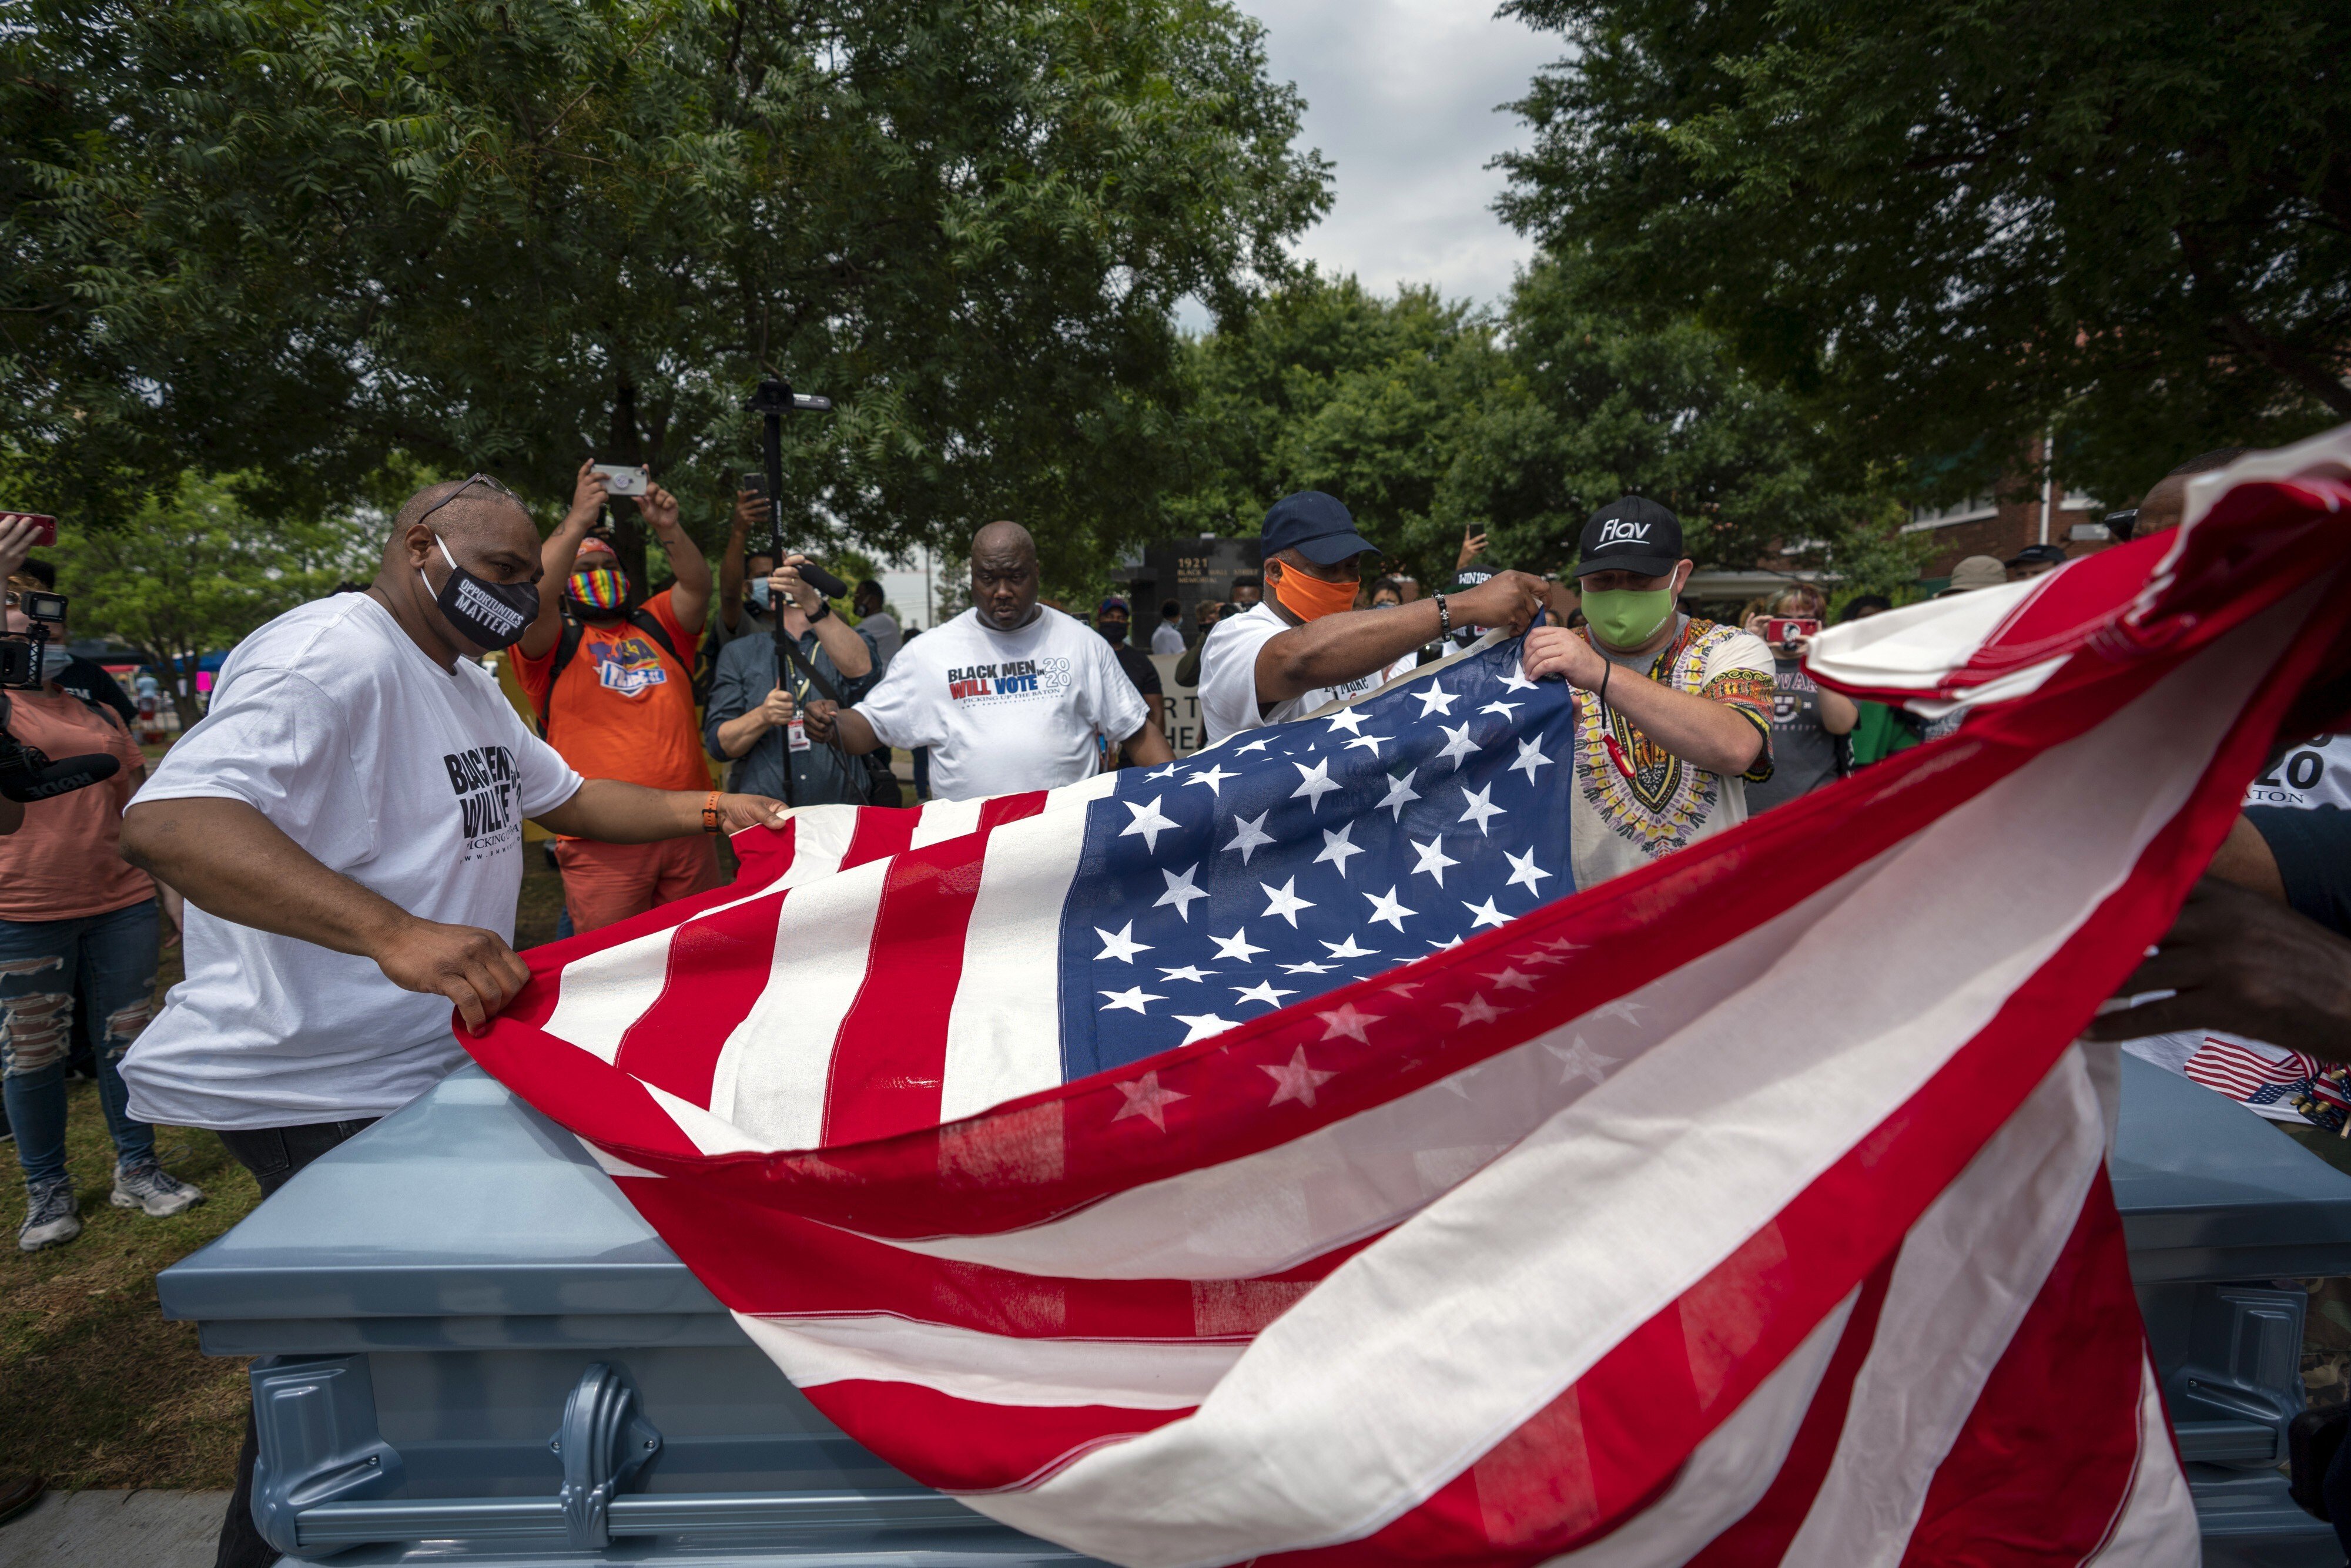 People fold an American flag near an empty casket during a Juneteenth celebration in Tulsa, Oklahoma. Photo: Bloomberg